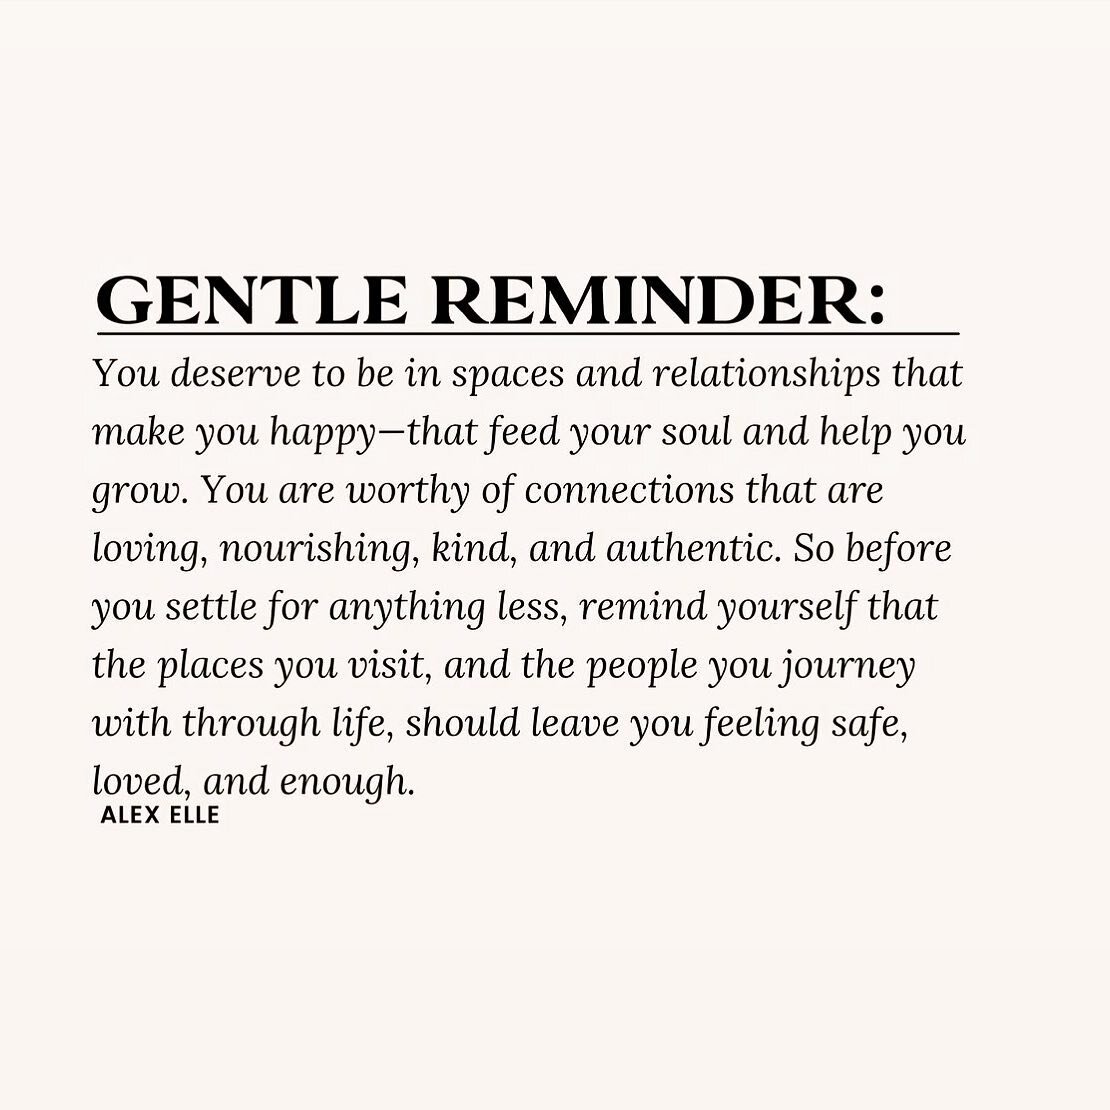 A gentle and oh so important reminder! 🌸#transitionhouse #boundaries #domesticvoilence #relationships #healthyrelationships #growth #trust #compassion #selflove #vancouverisland #relationshipquotes #relationshipadvice #nanaimo #ladysmith #malahat #d